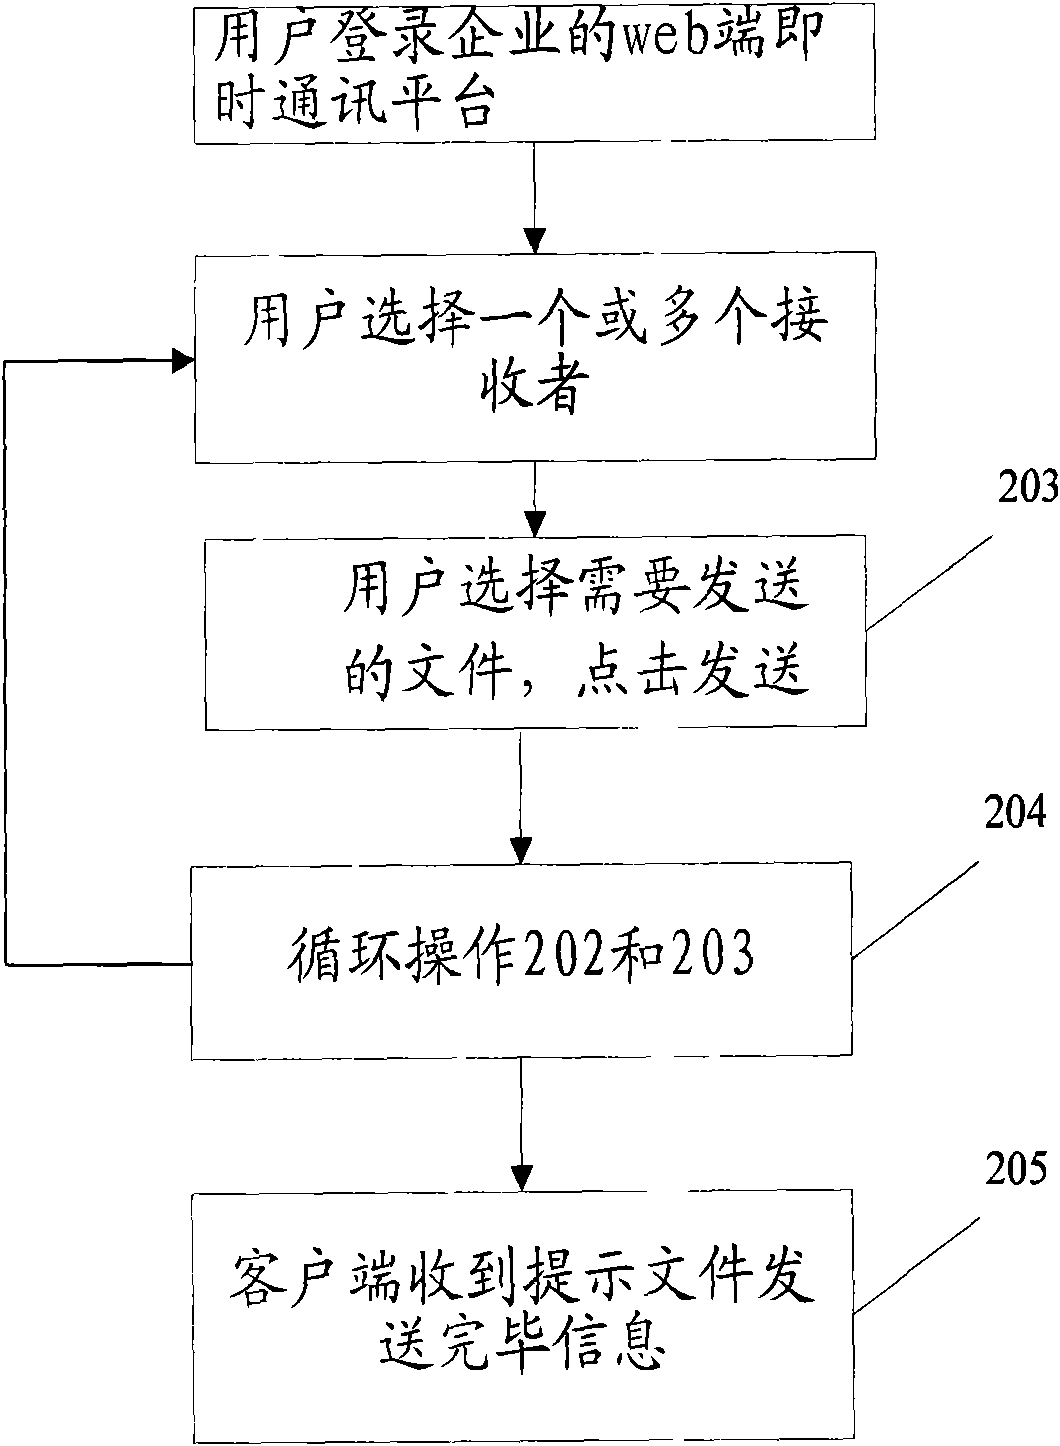 Method supporting web page switching for uploading a plurality of documents to web browser